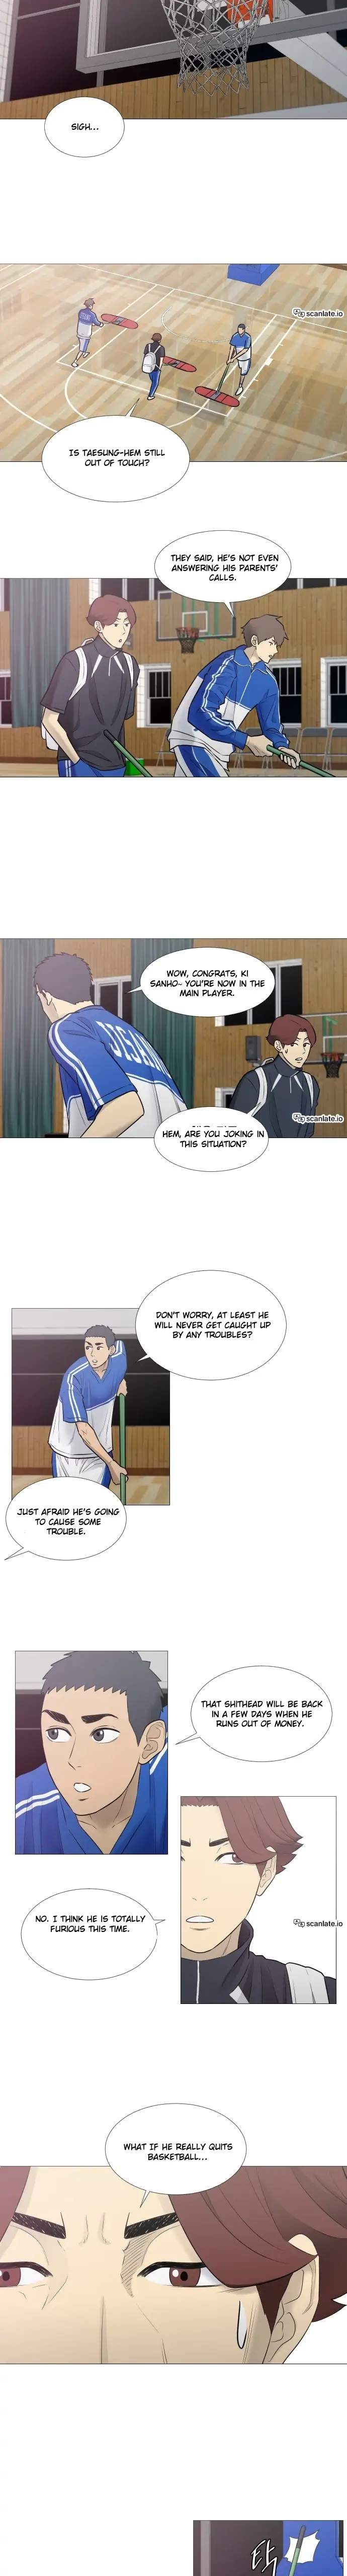 Garbage Time – Basketball Underdogs Chapter 14-eng-li - Page 10